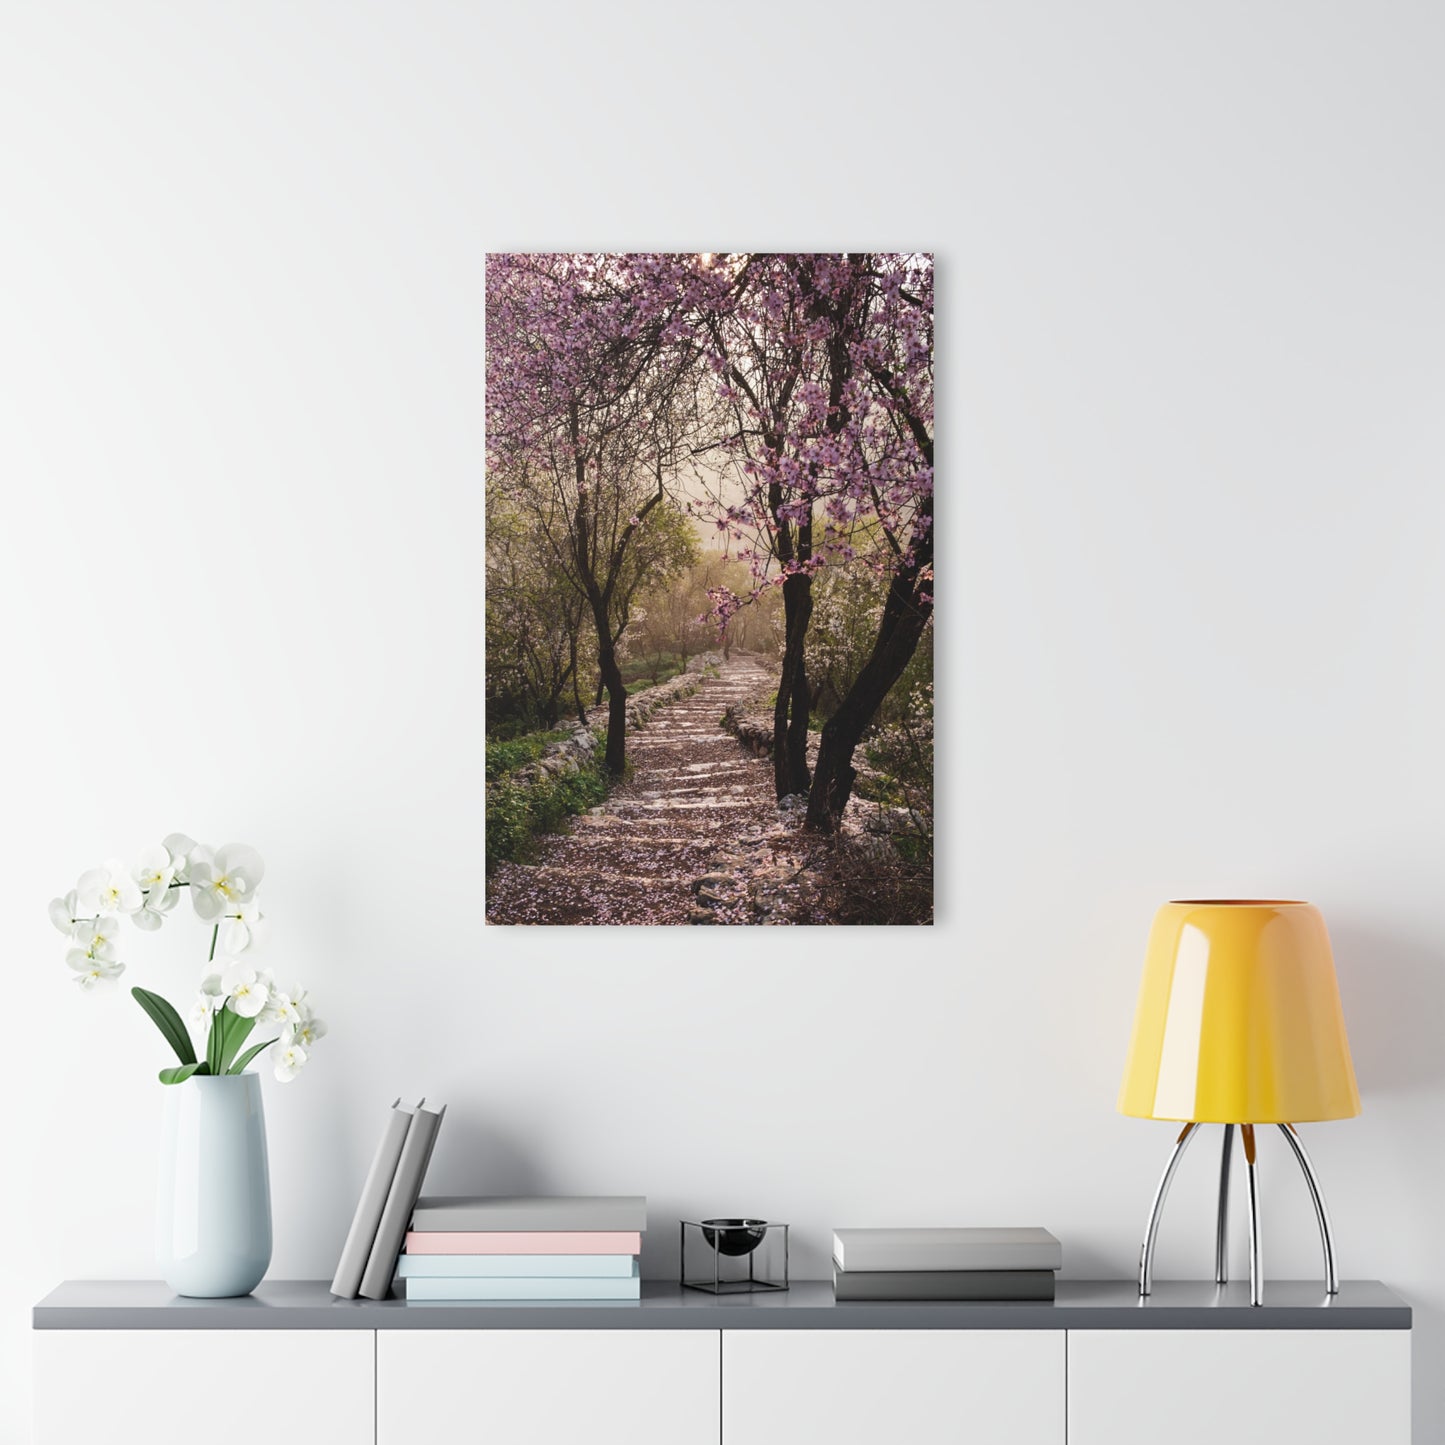 Enchanted Almond Forest by Yehoshua Halevi Photograph - Acrylic Print (French Cleat Hanging)